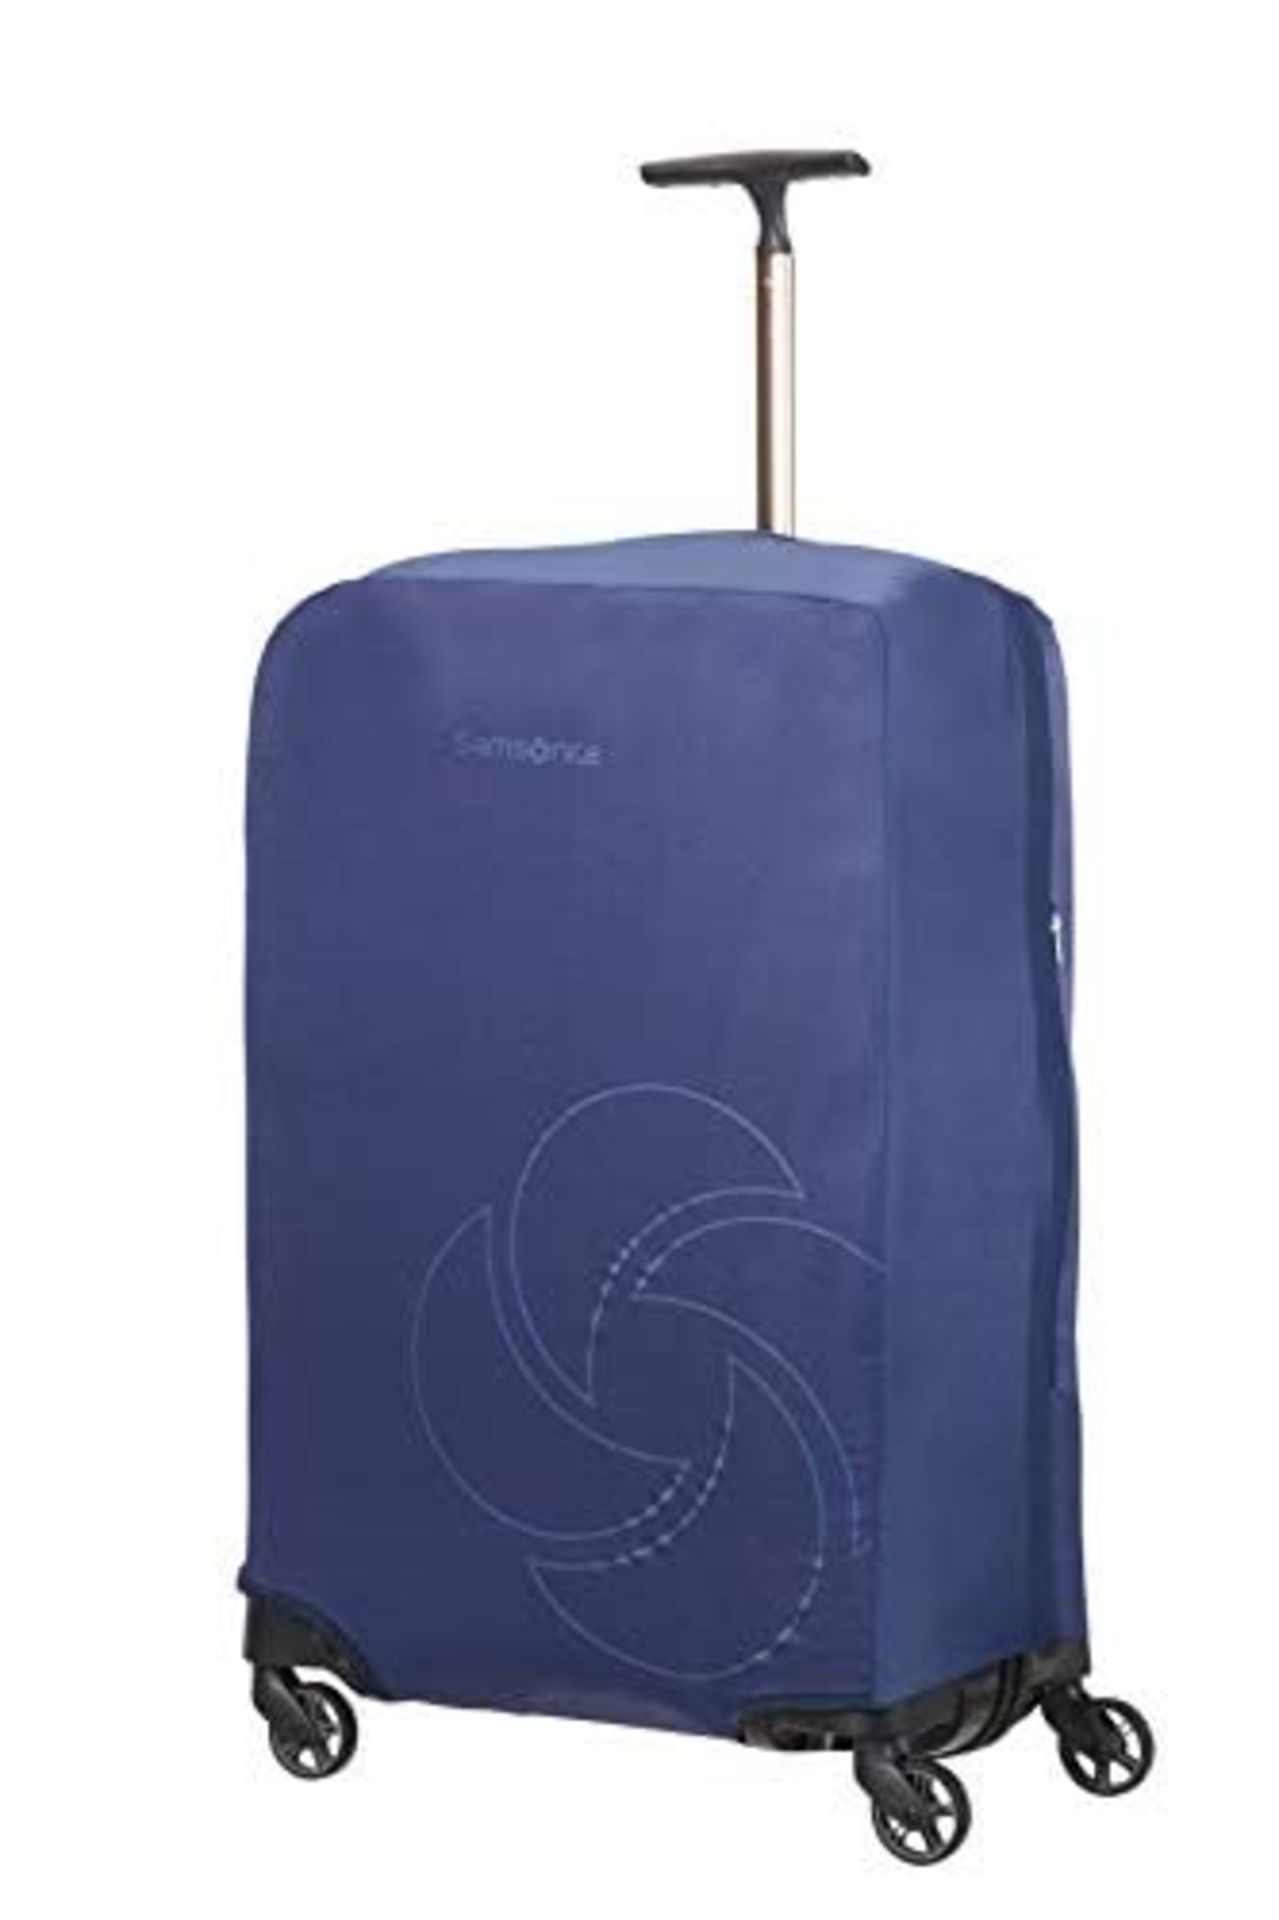 Samsonite Global Travel Accessories - Foldable Suitcase Cover M/L, Blue (Midnight Blue